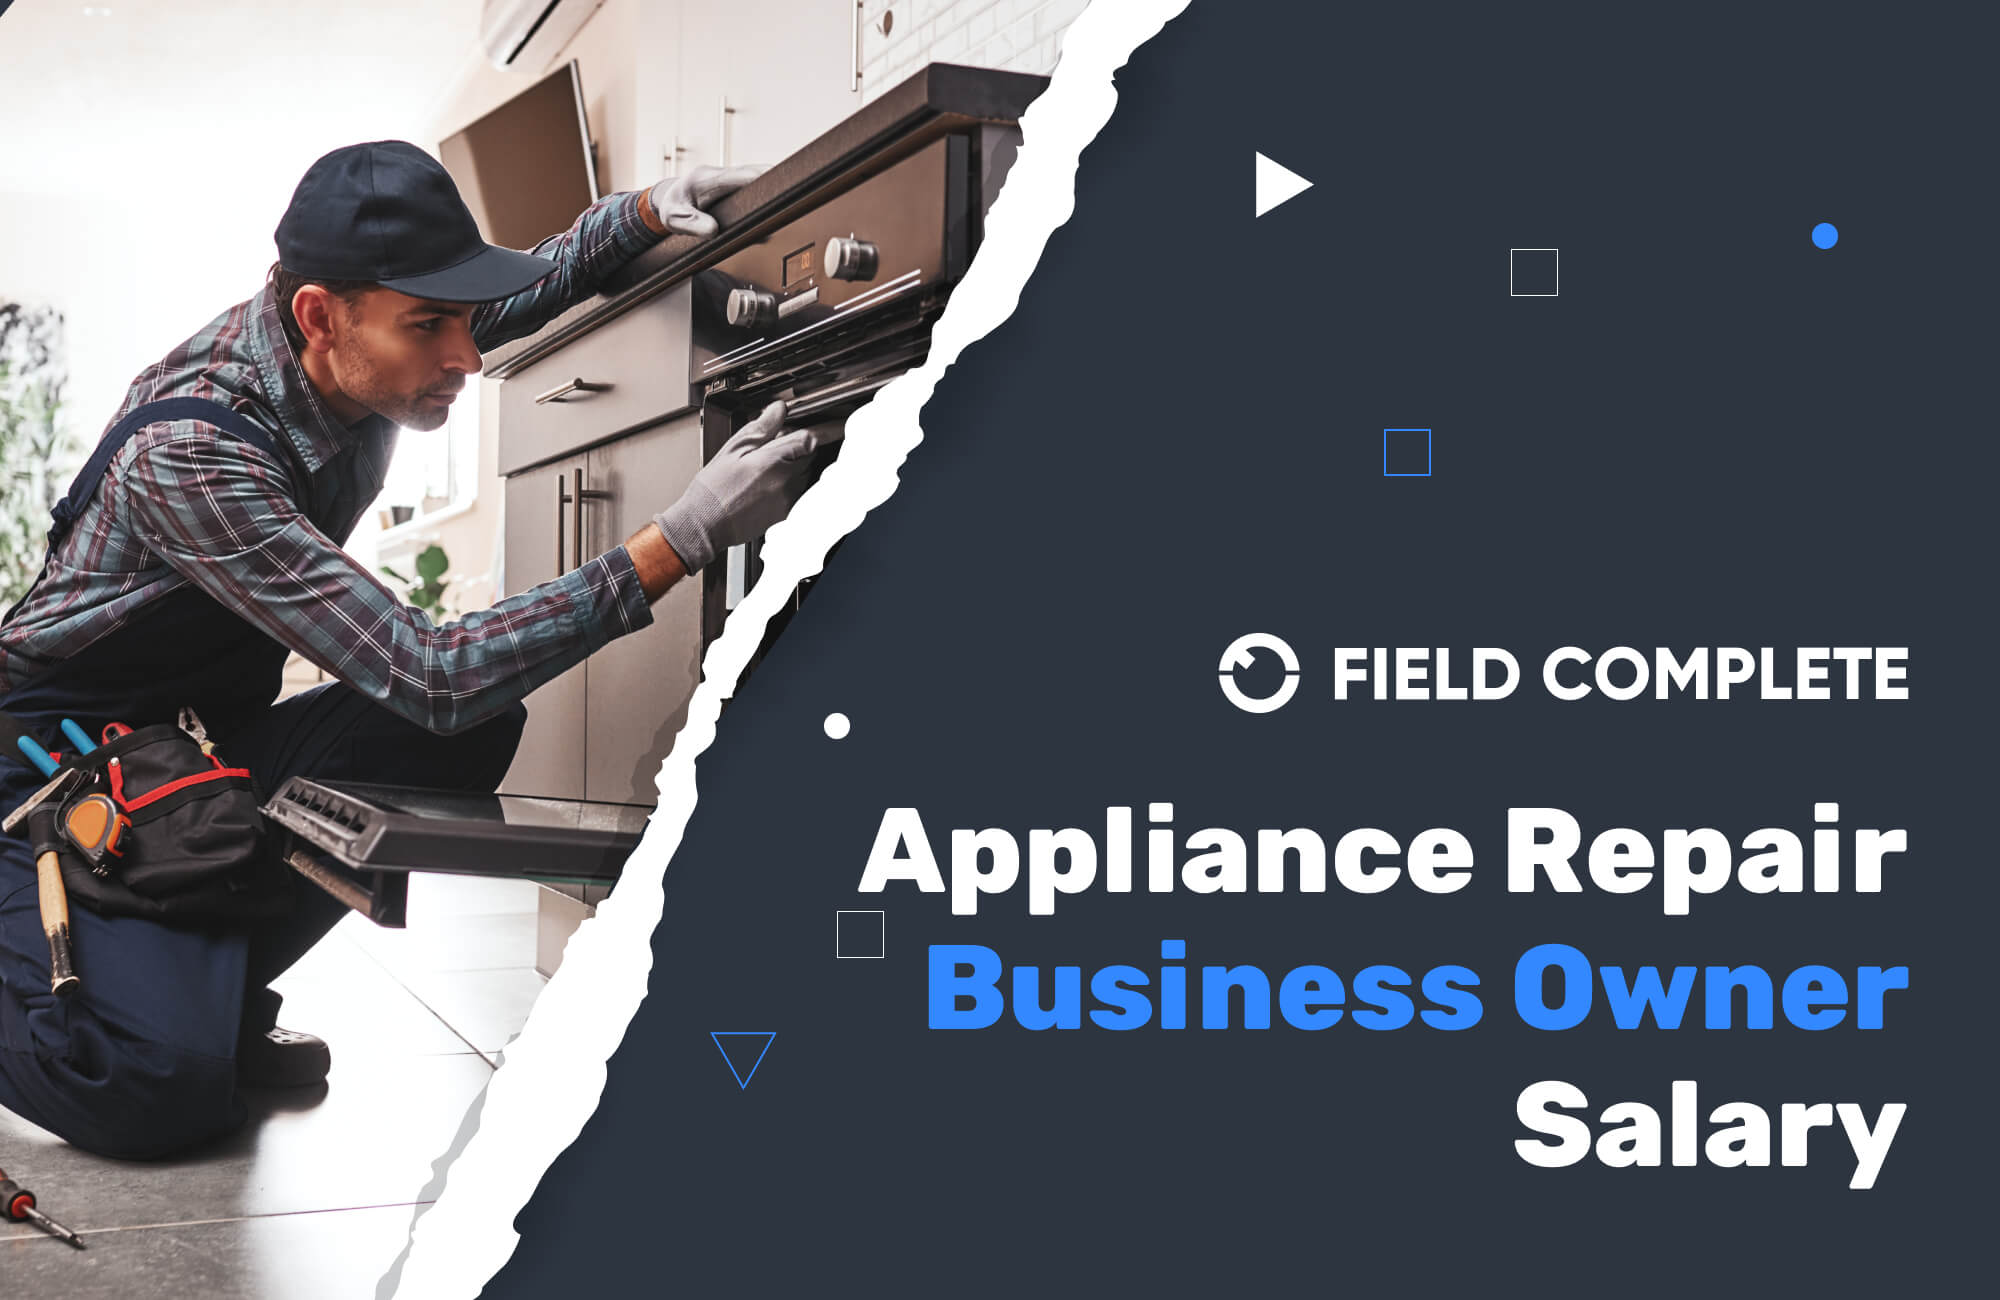 download the last version for iphoneConnecticut residential appliance installer license prep class